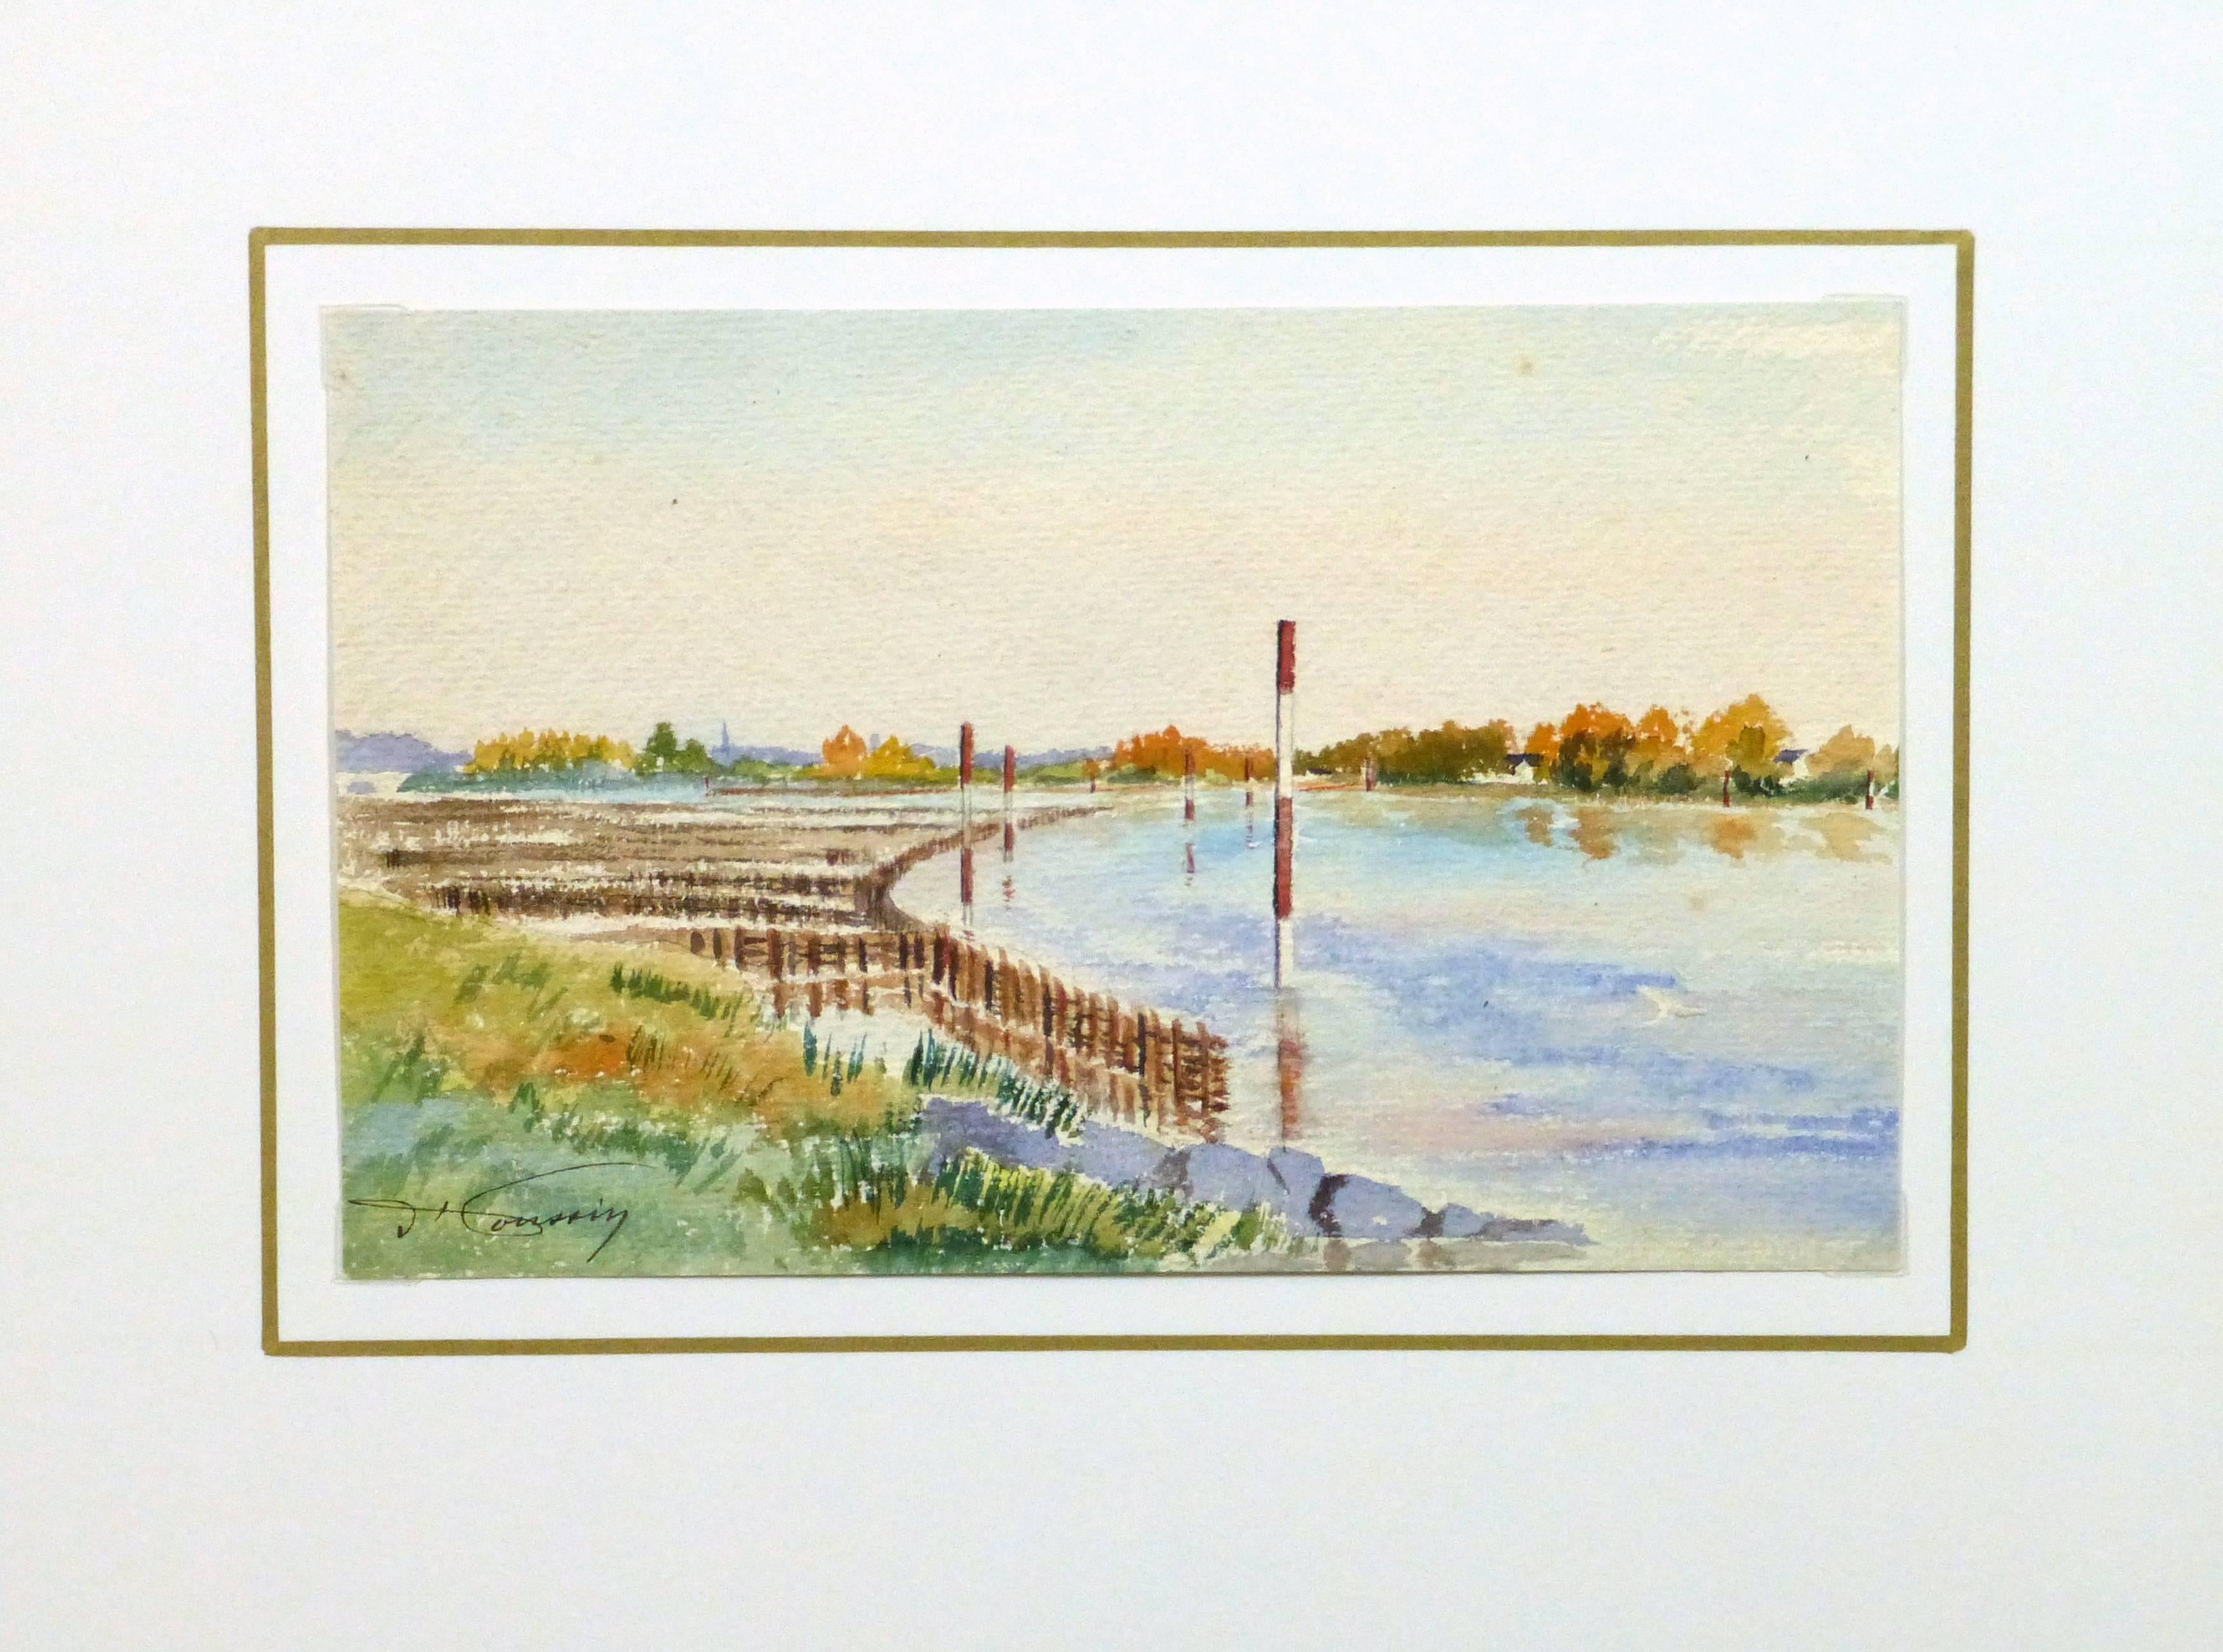 Refreshing watercolor landscape of a scene from the La Bière River in France by Houssin, 1908. Signed lower left.

Original one-of-a-kind artwork on paper displayed on a white mat with a gold border. Mat fits a standard-size frame. Archival plastic